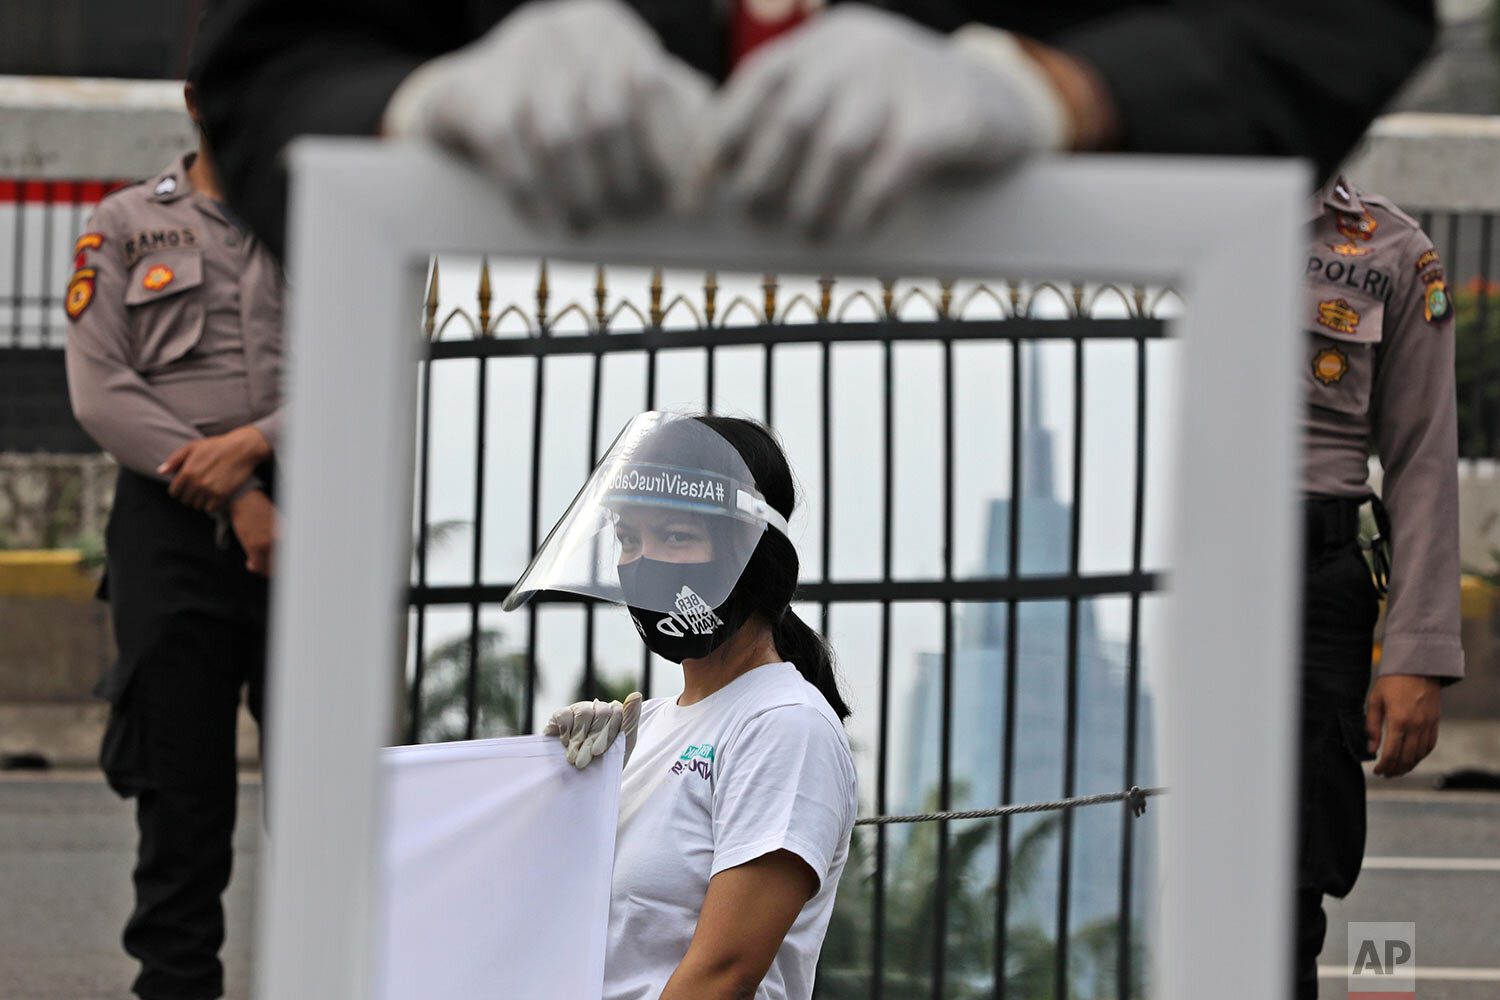  A mirror reflects the image of an activist wearing a mask and protective face shield as a precaution against the new coronavirus outbreak during a small protest outside the parliament in Jakarta, Indonesia, Tuesday, July 14, 2020. (AP Photo/Dita Ala